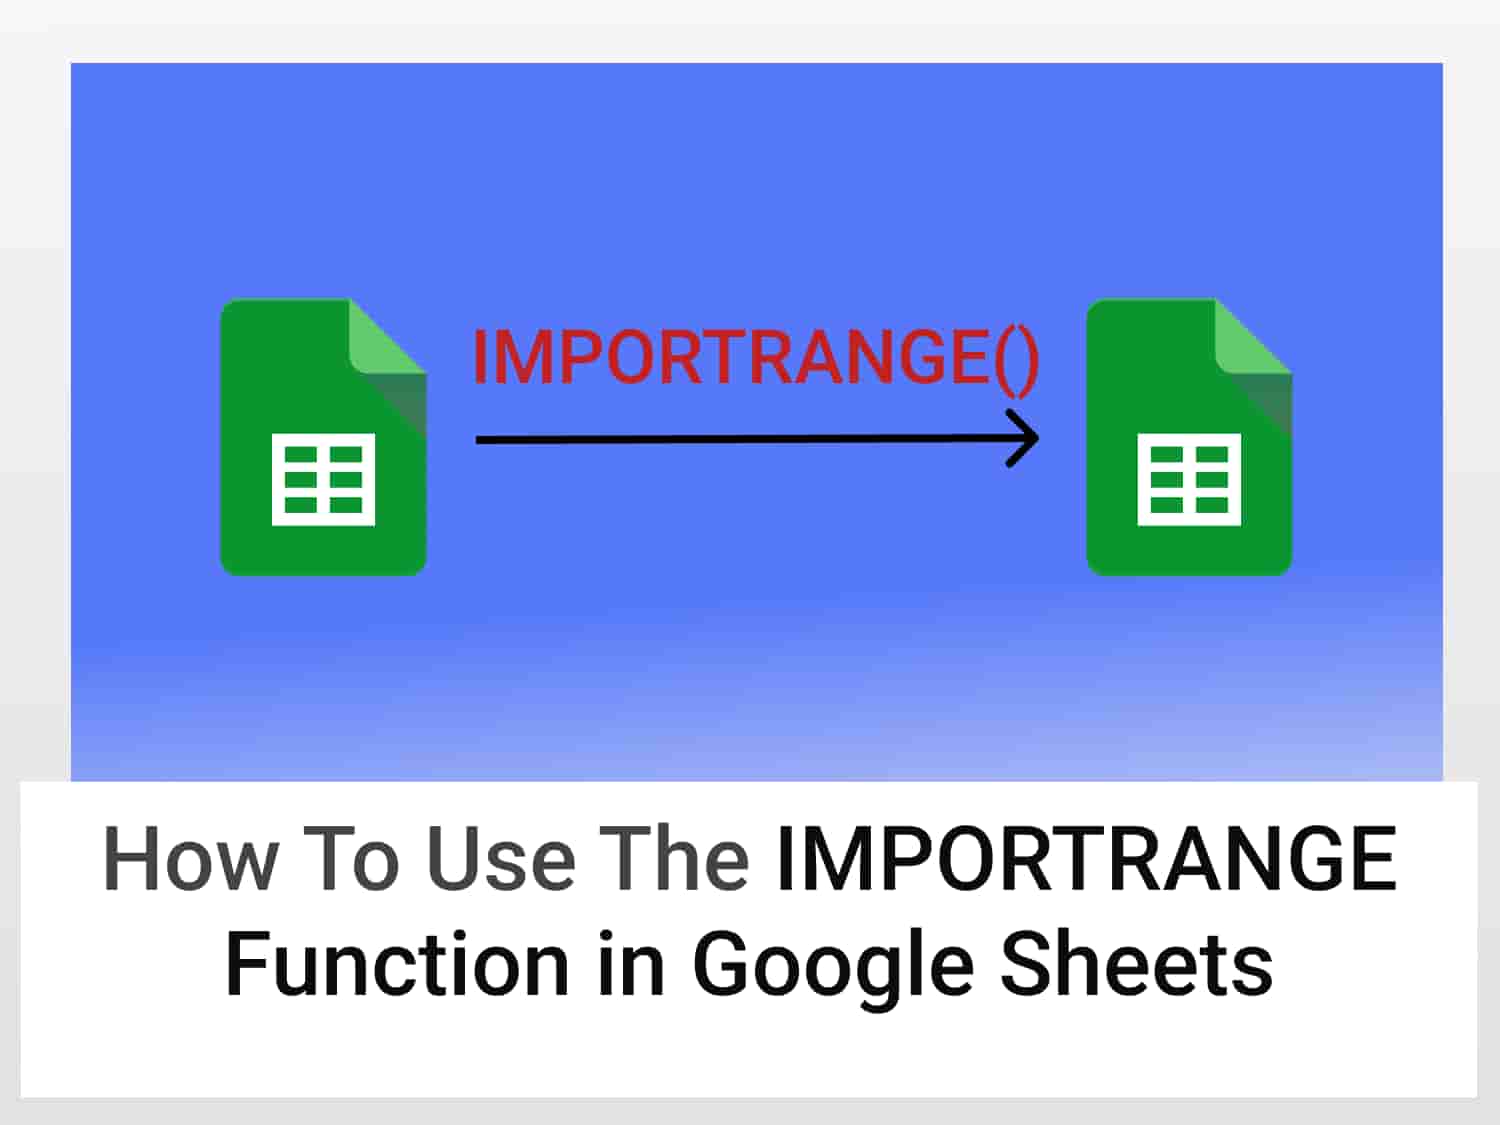 How to Use the ImportRange Function in Google Sheets